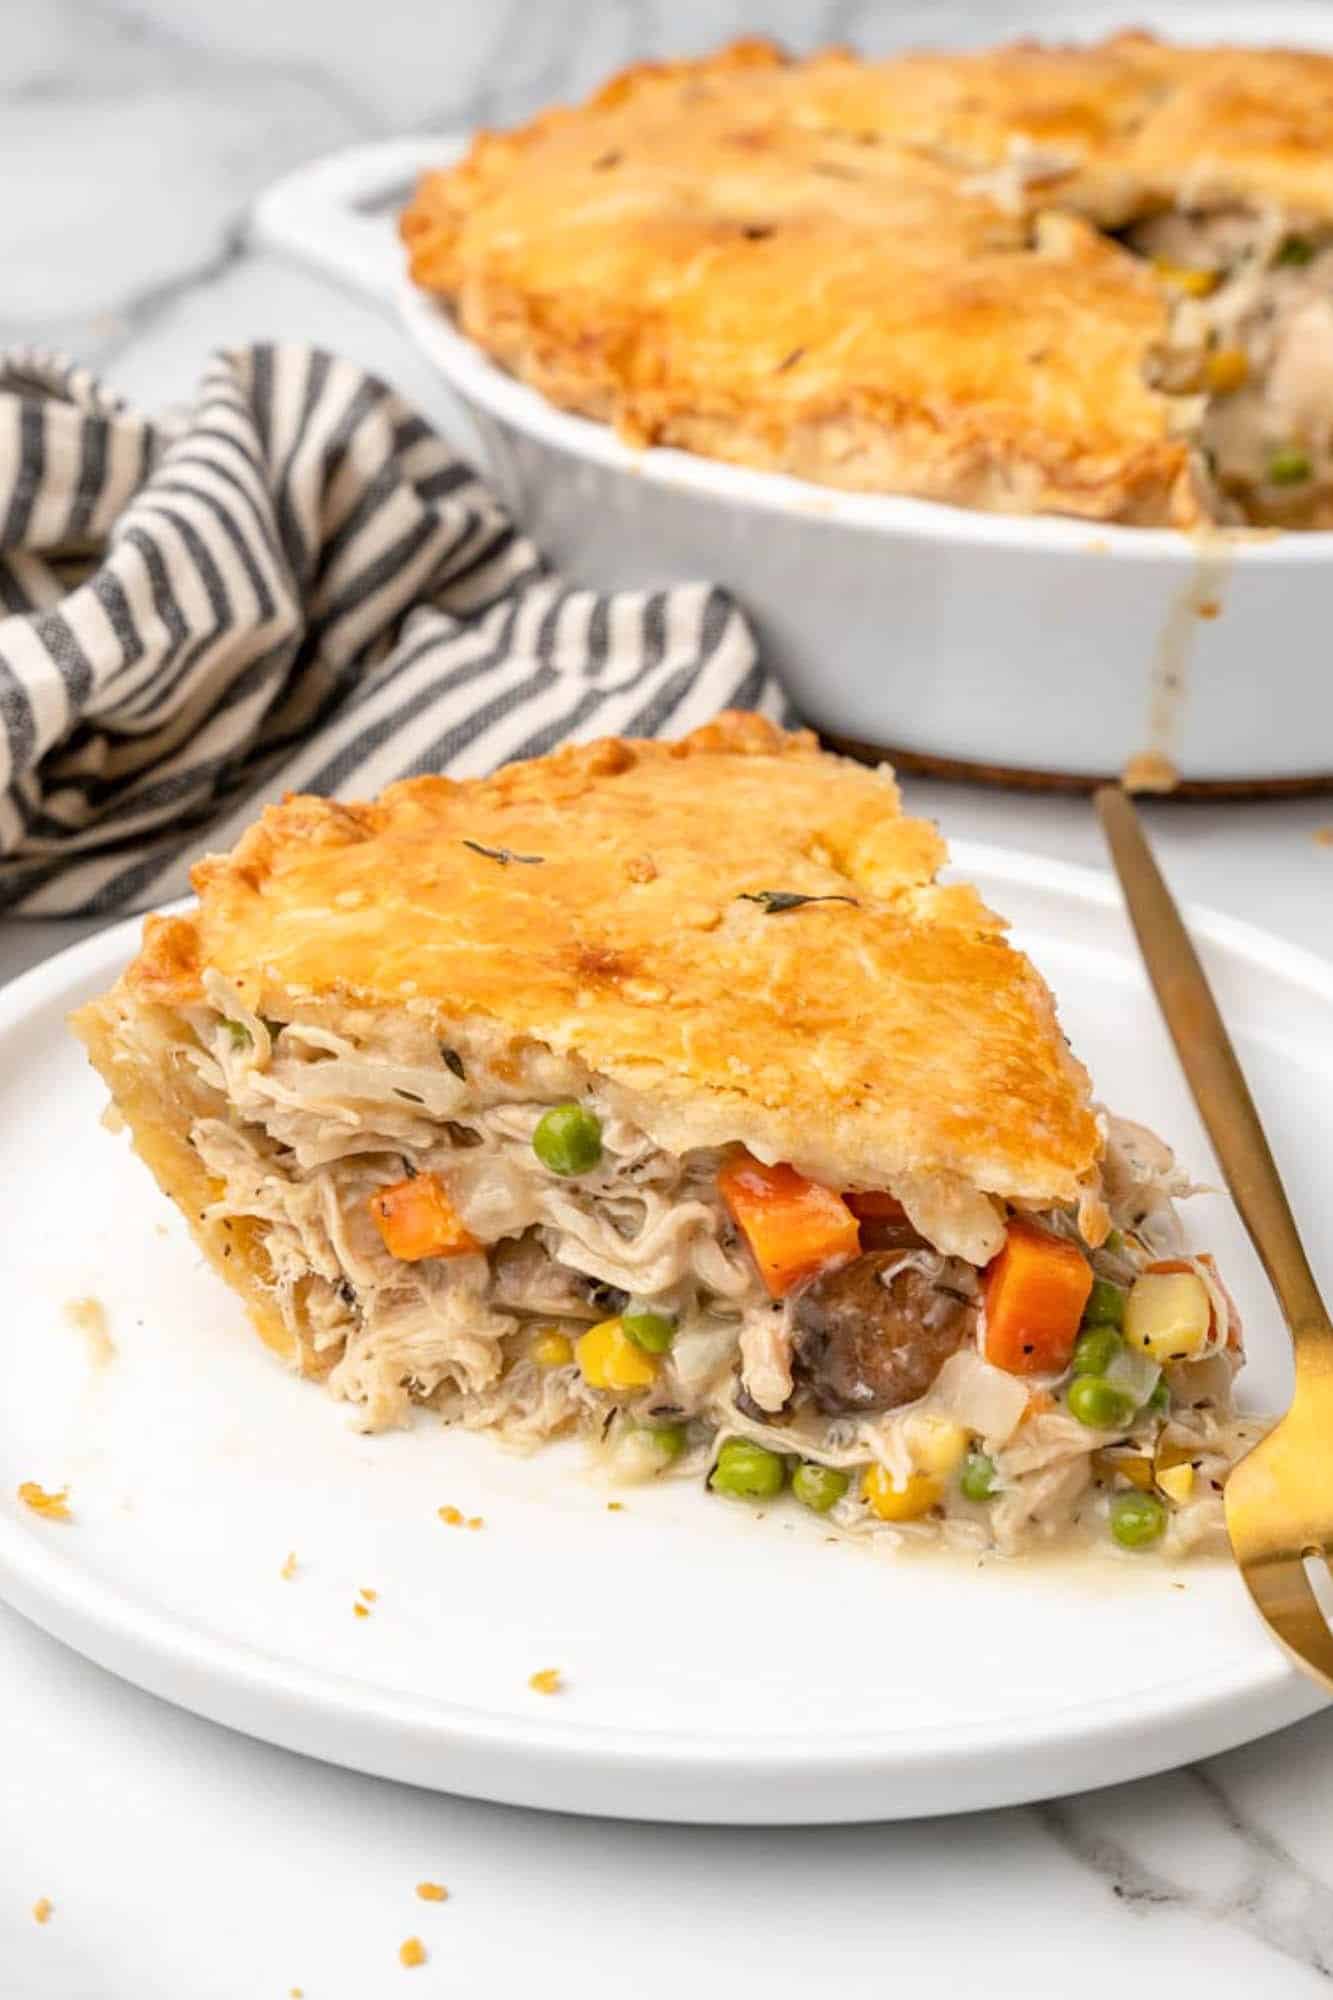 a wedge shaped slice of homemade chicken pot pie on a plate.